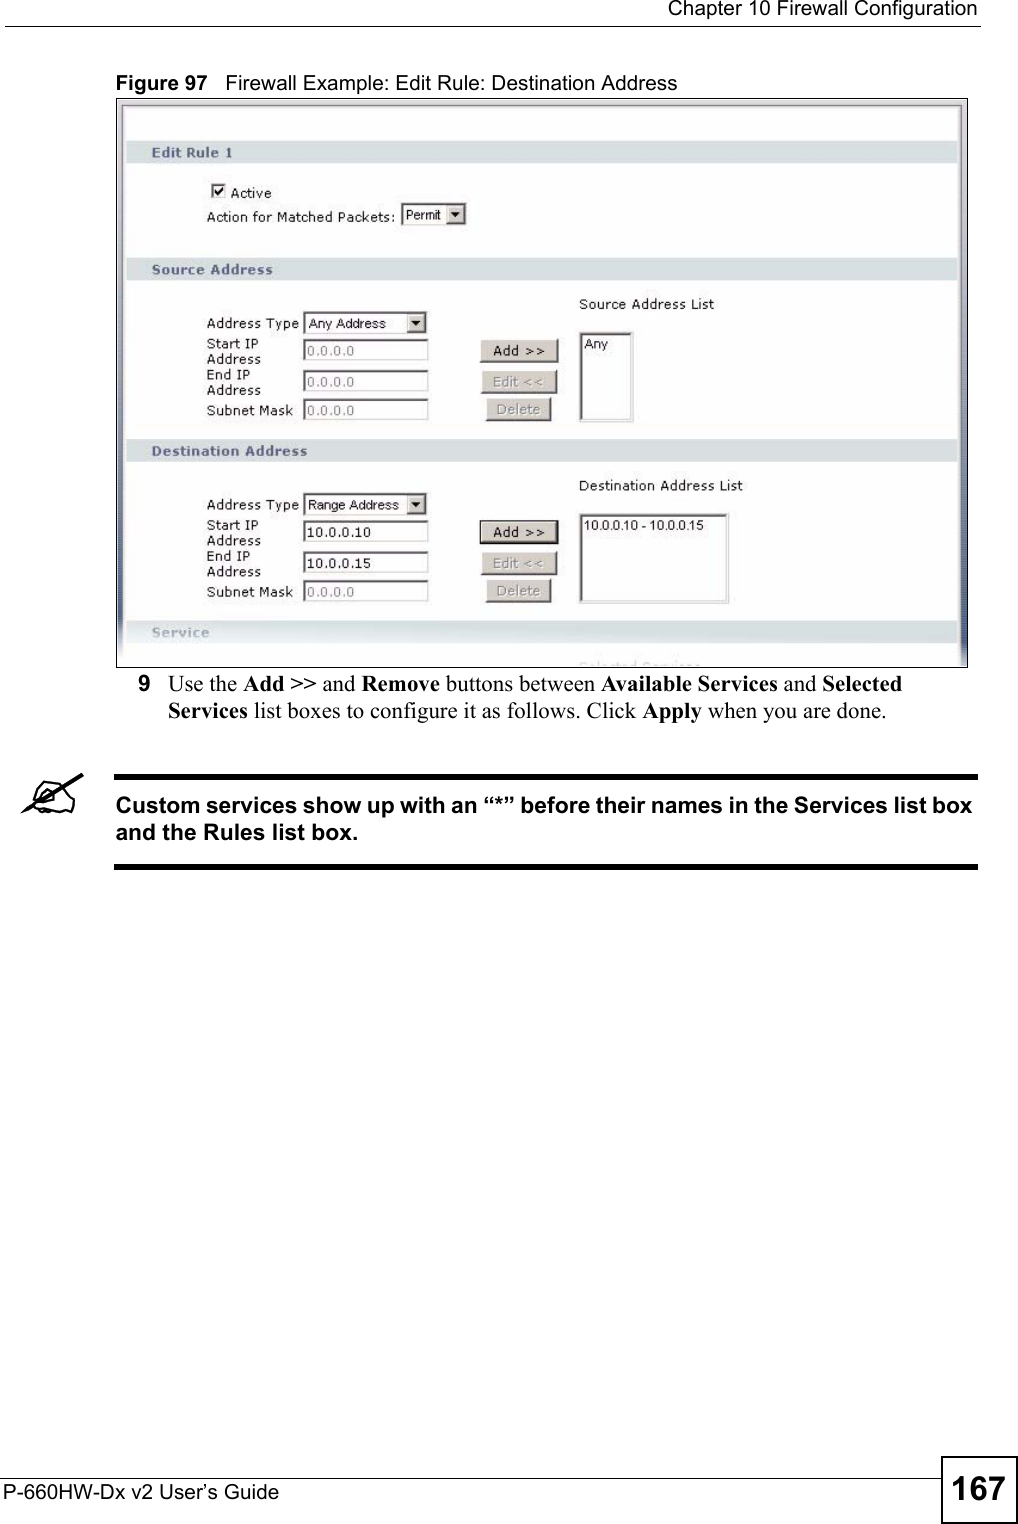  Chapter 10 Firewall ConfigurationP-660HW-Dx v2 User’s Guide 167Figure 97   Firewall Example: Edit Rule: Destination Address 9Use the Add &gt;&gt; and Remove buttons between Available Services and Selected Services list boxes to configure it as follows. Click Apply when you are done.&quot;Custom services show up with an “*” before their names in the Services list box and the Rules list box. 